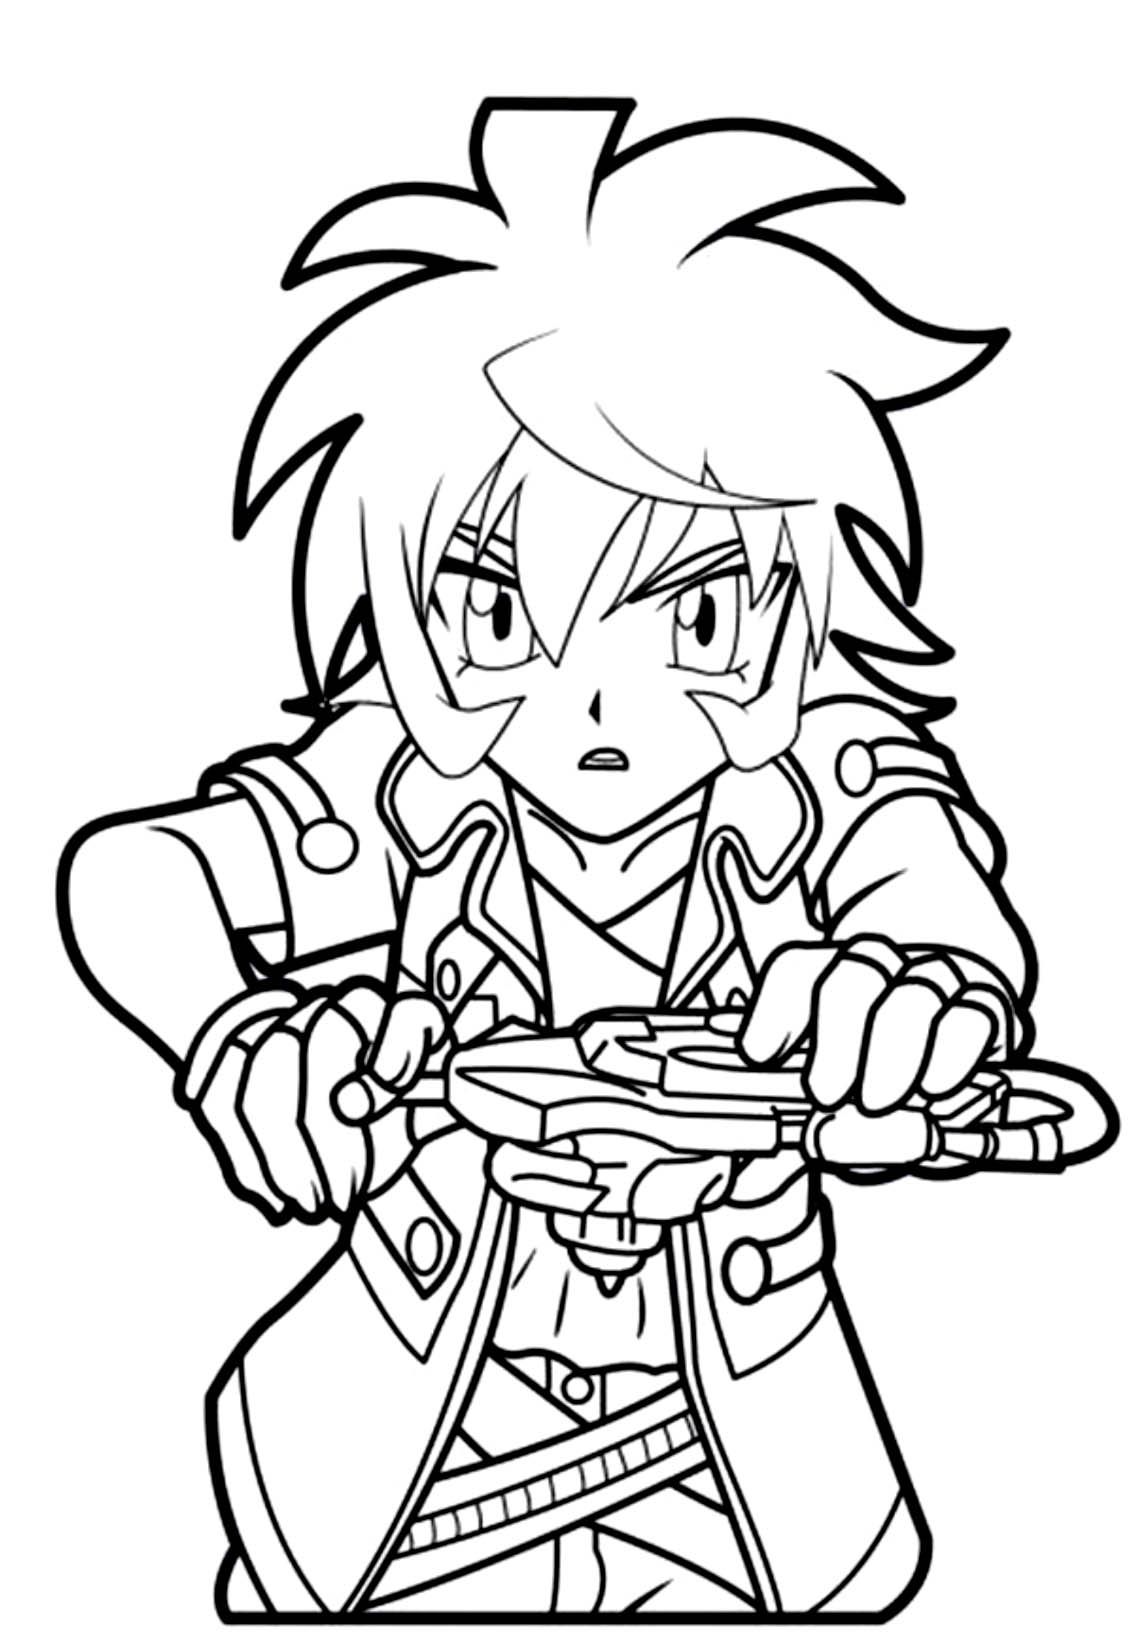 Printable Beyblade Coloring Pages | Coloring Me